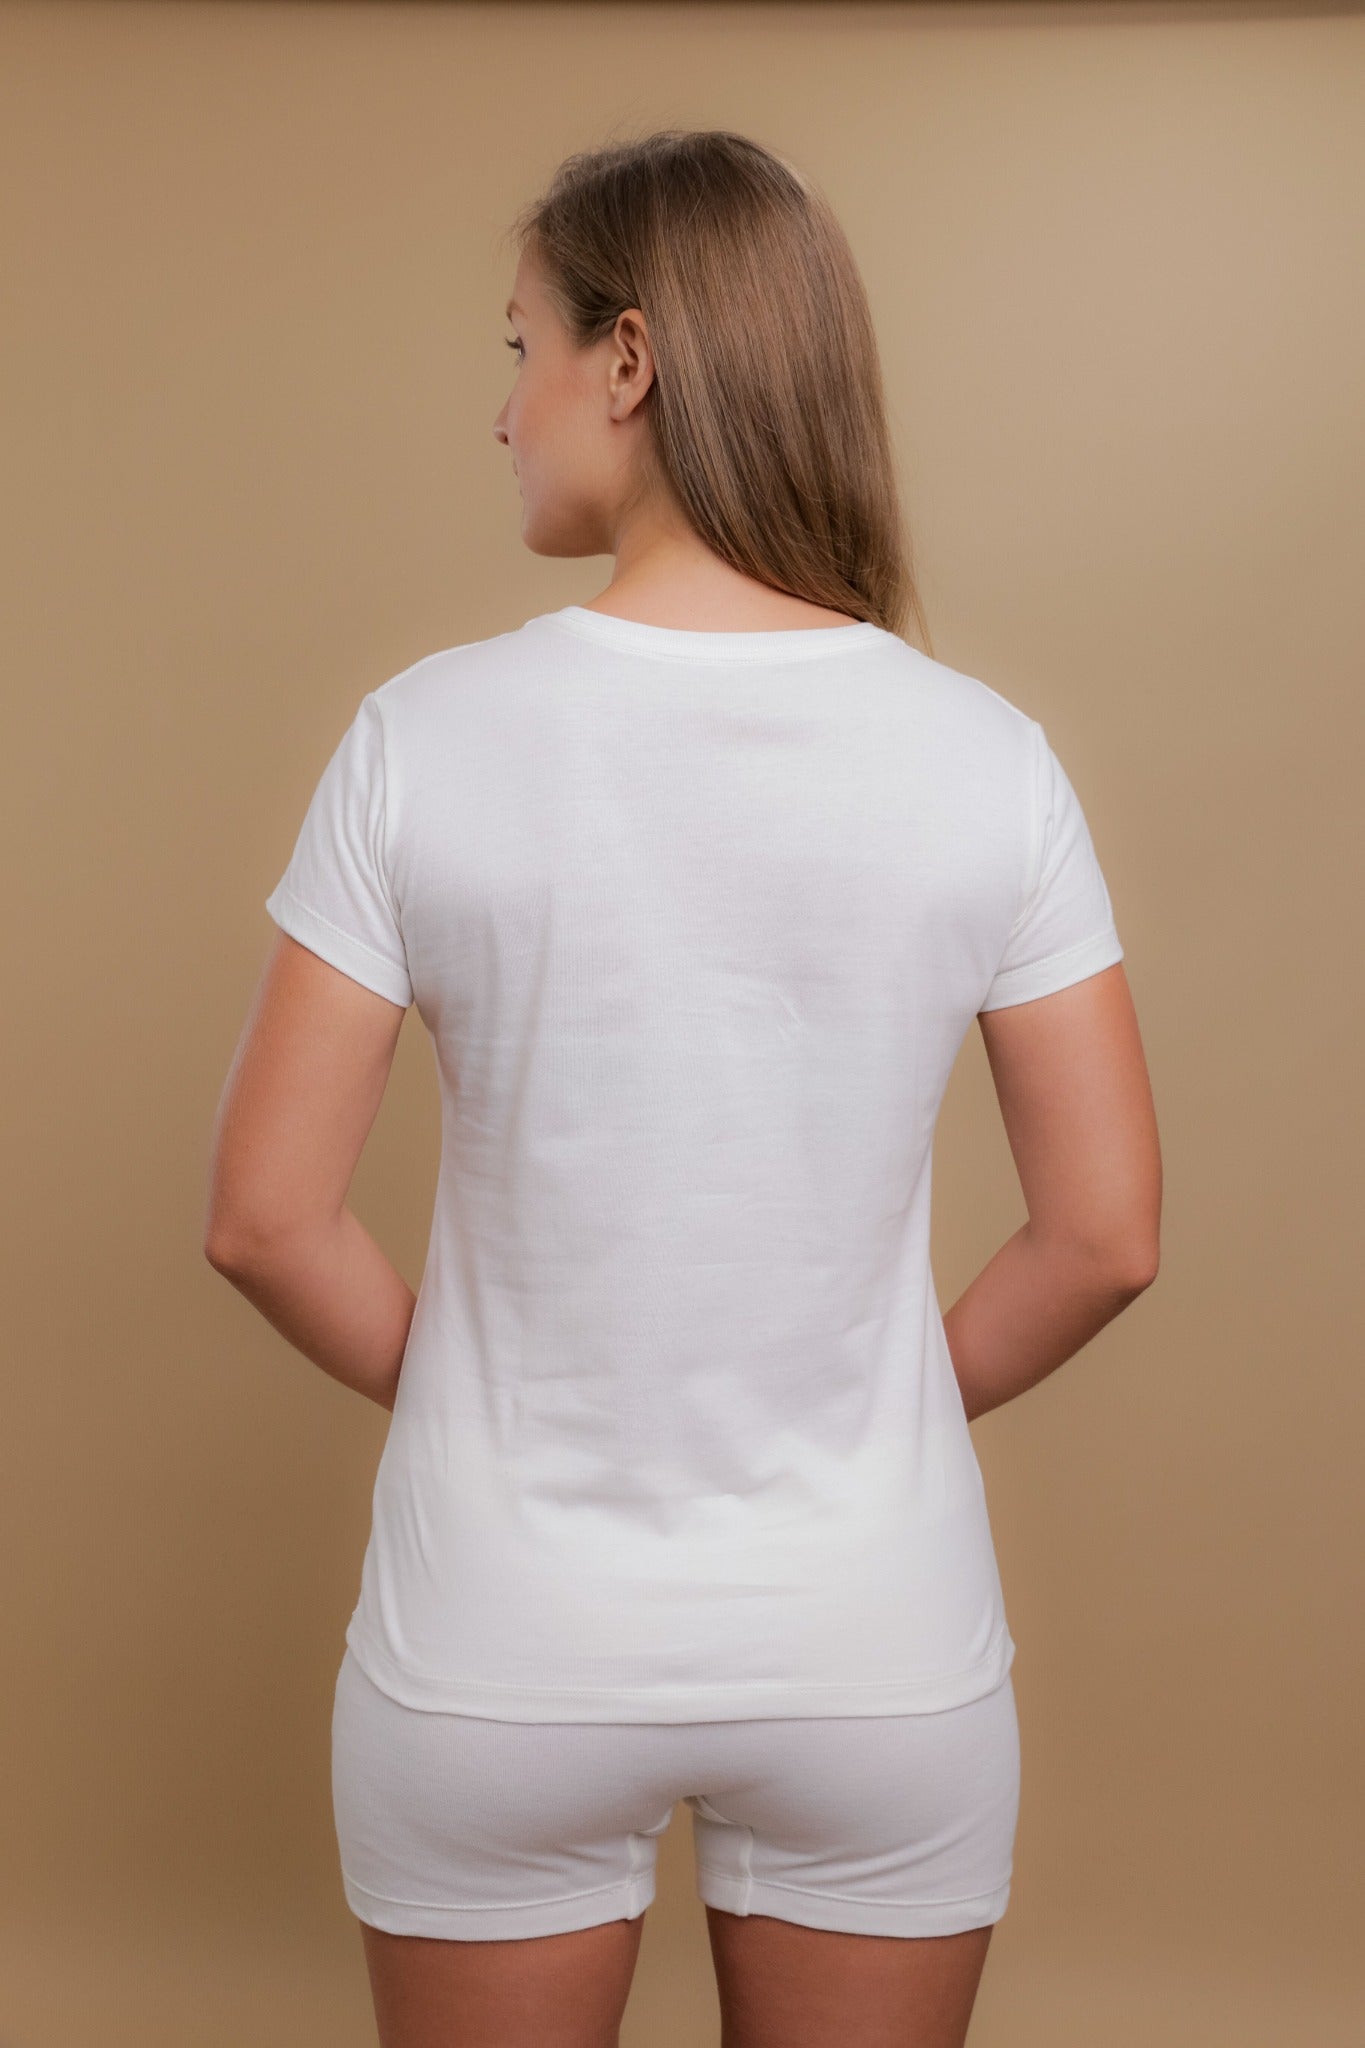 8 Benefits of Organic Cotton Clothing – Cottonique - Allergy-free Apparel